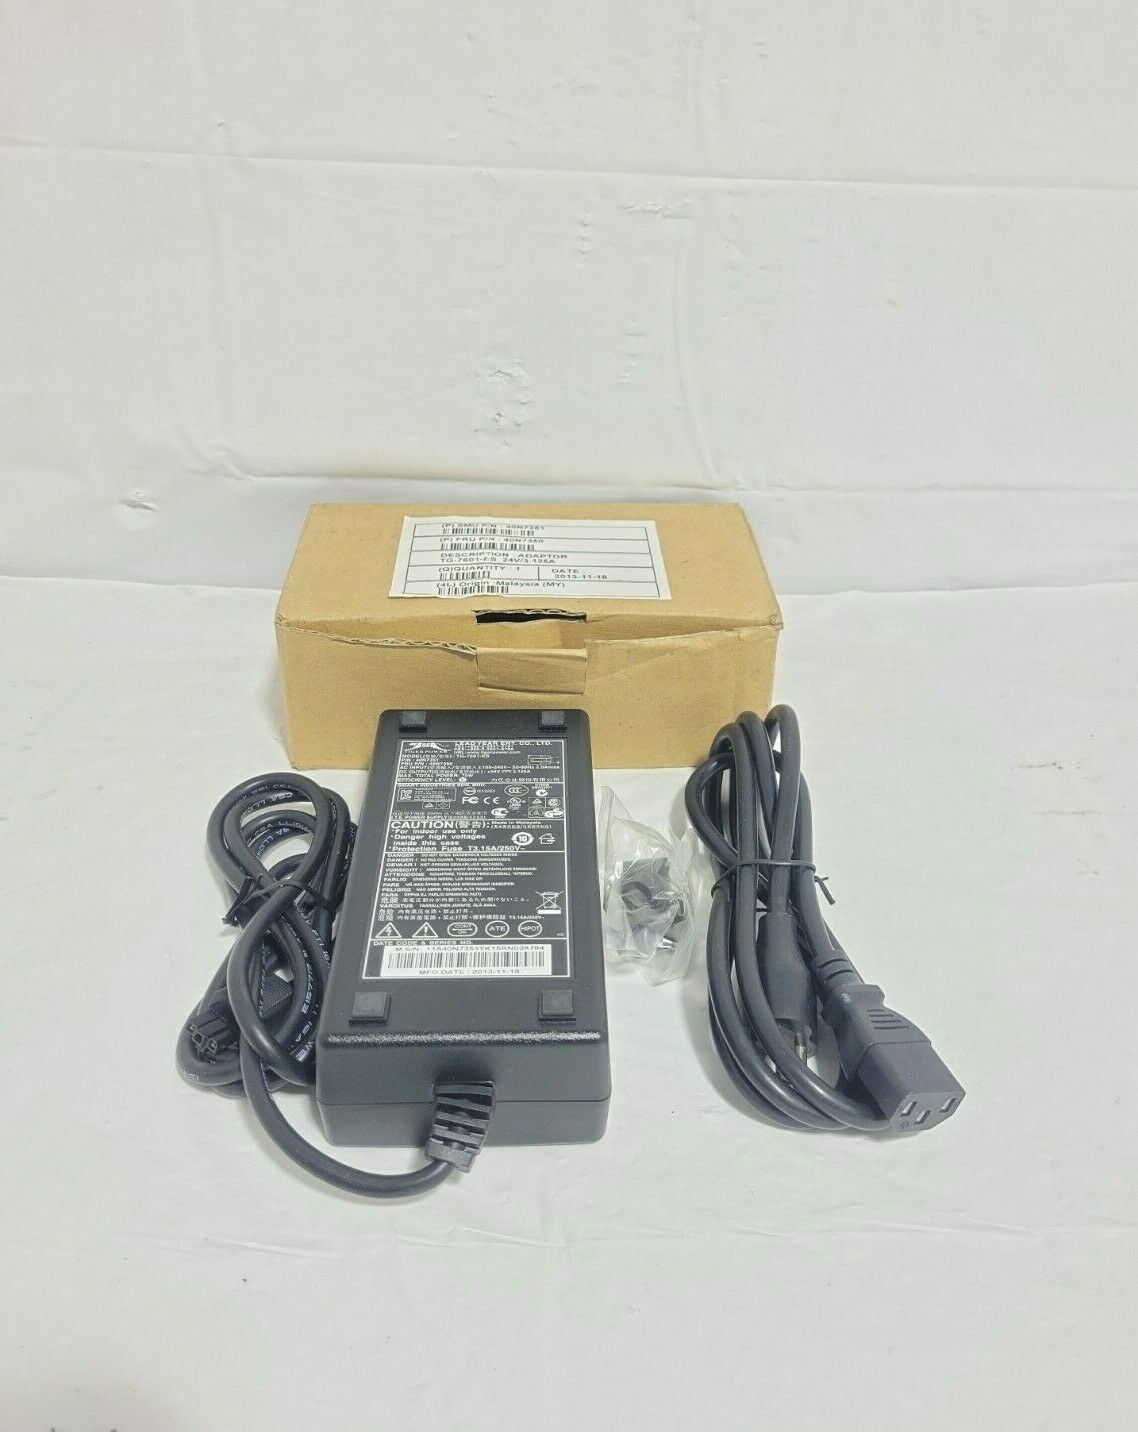 Tiger P/N: 40N7351 TG-7601-ES 24V 75W Power Supply Thermal POS Receipt Printer NEW OTHER This item is being sold as n - Click Image to Close